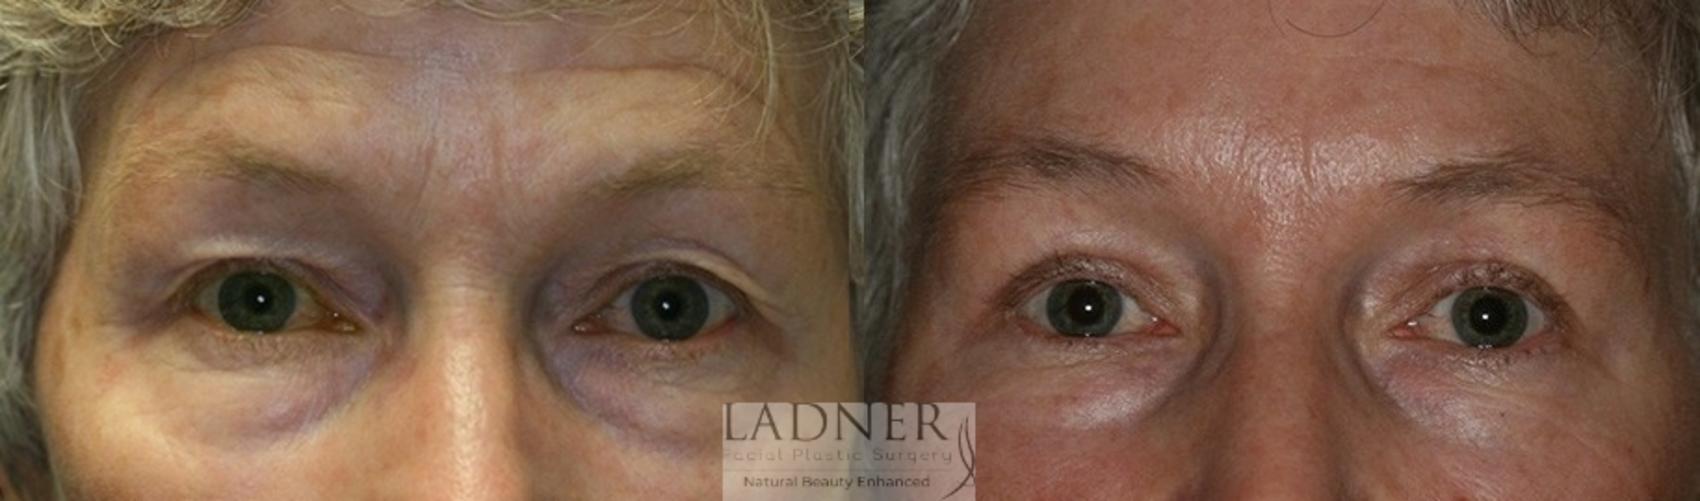 Brow Lift / Forehead Lift Case 49 Before & After Front | Denver, CO | Ladner Facial Plastic Surgery